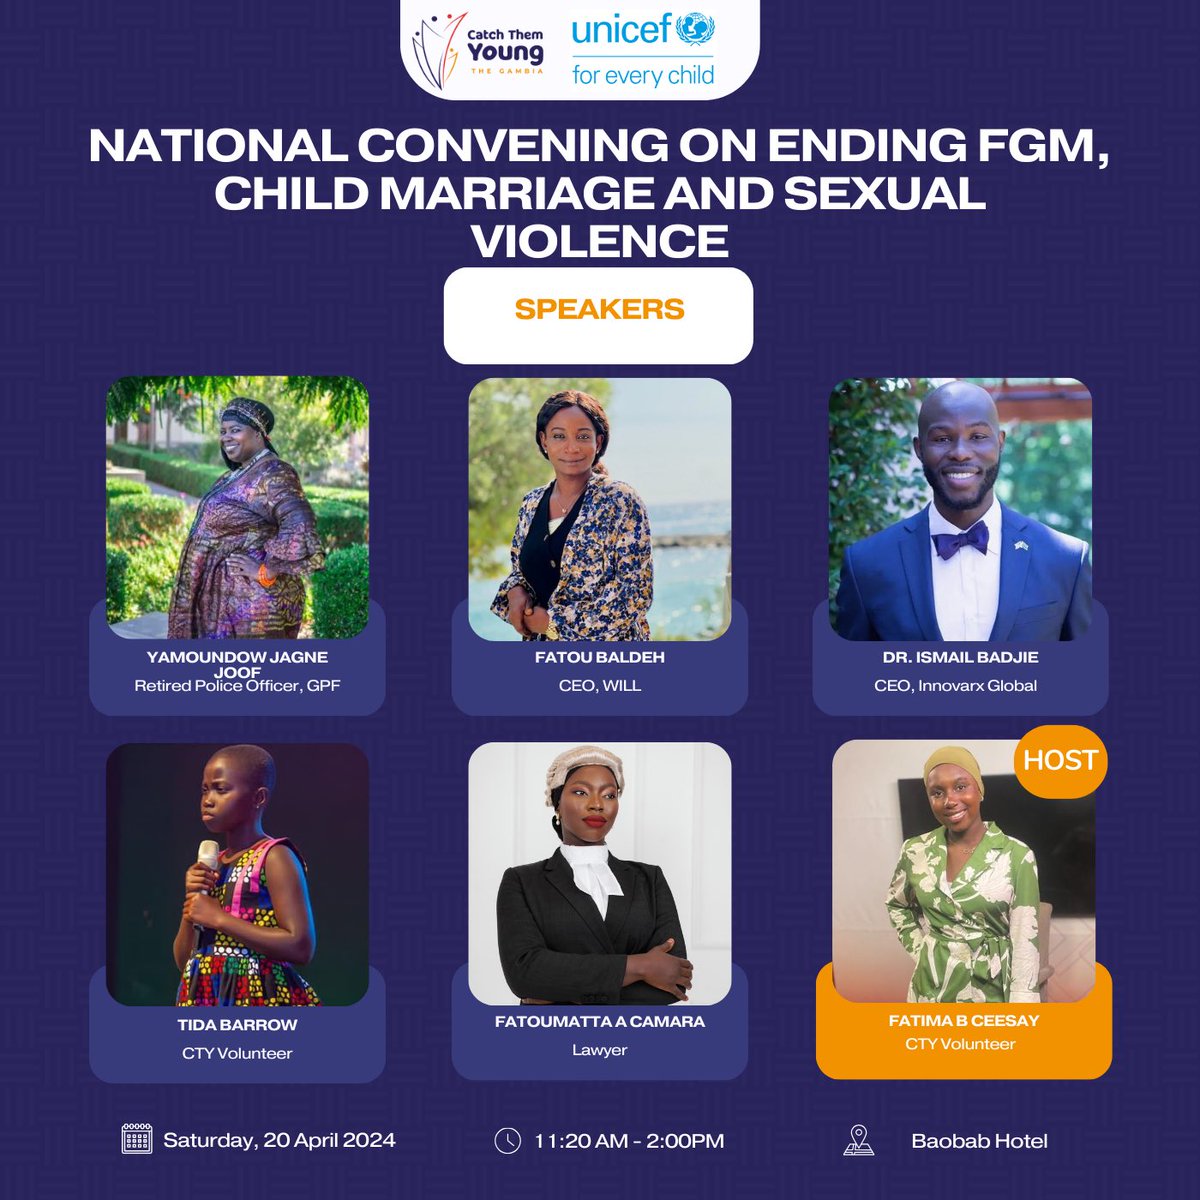 Join us tomorrow at Baobab Hotel as we hold a national conversation on ending FGM, child marriage and sexual violence. ⏰ 9am - 2pm 🗓 20 April Funded by @UNICEFGambia #EndFGM220